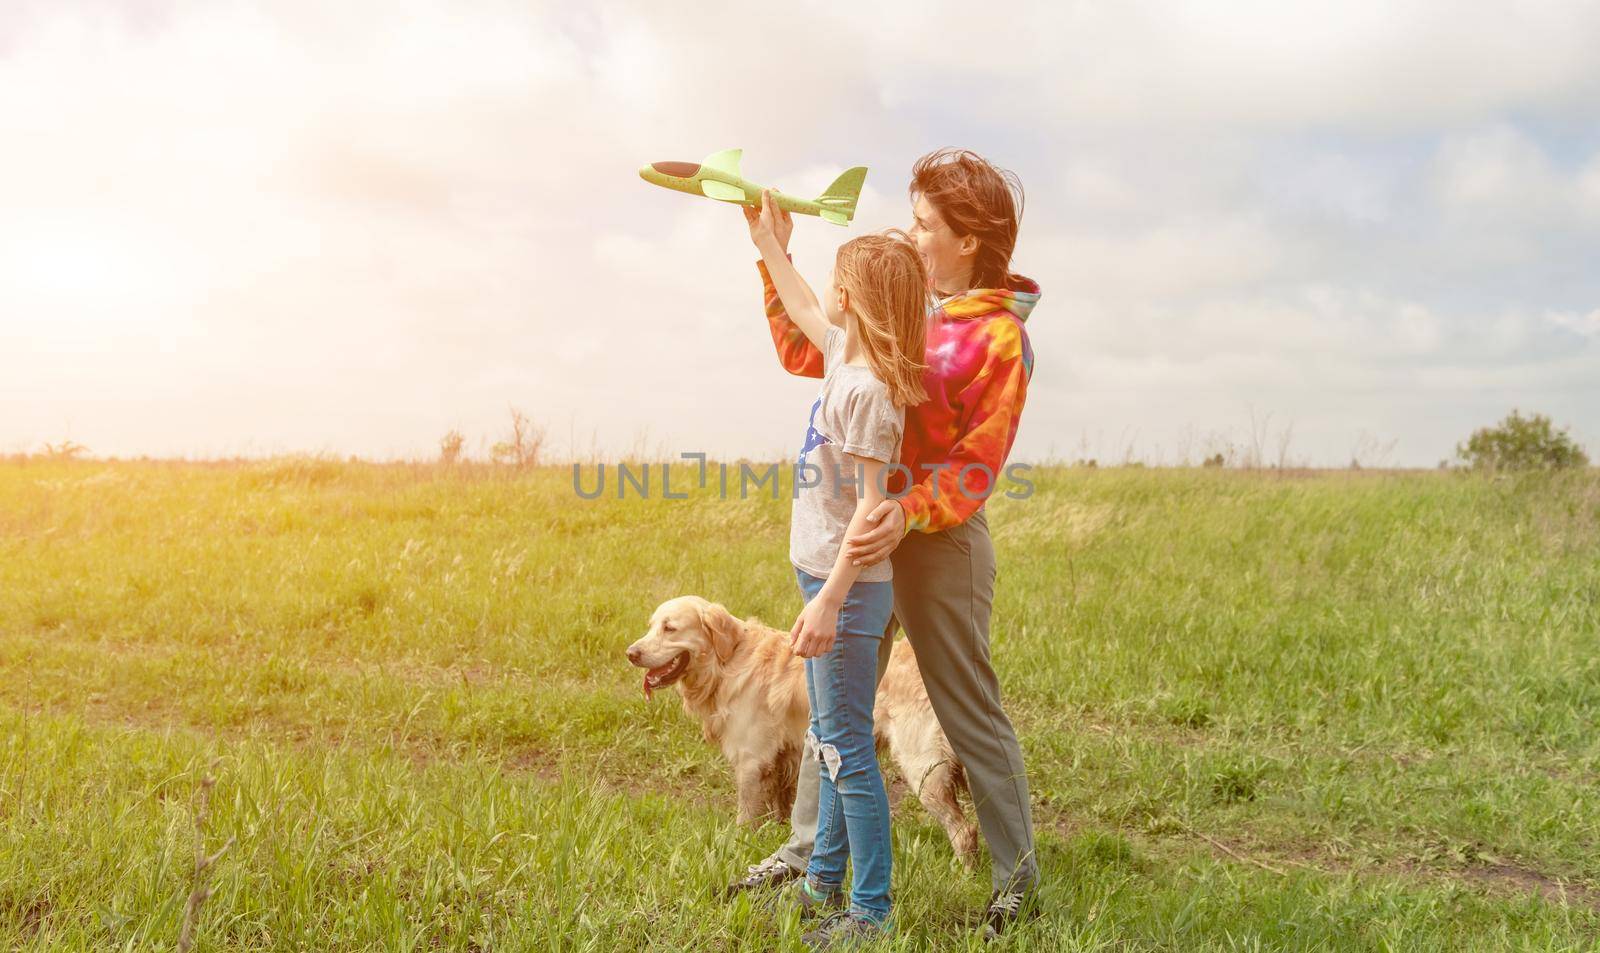 Mother and daughter with toy plane and golden retriever dog spending time at the field together. Girl, woman and pet doggy playing with airplane at the nature